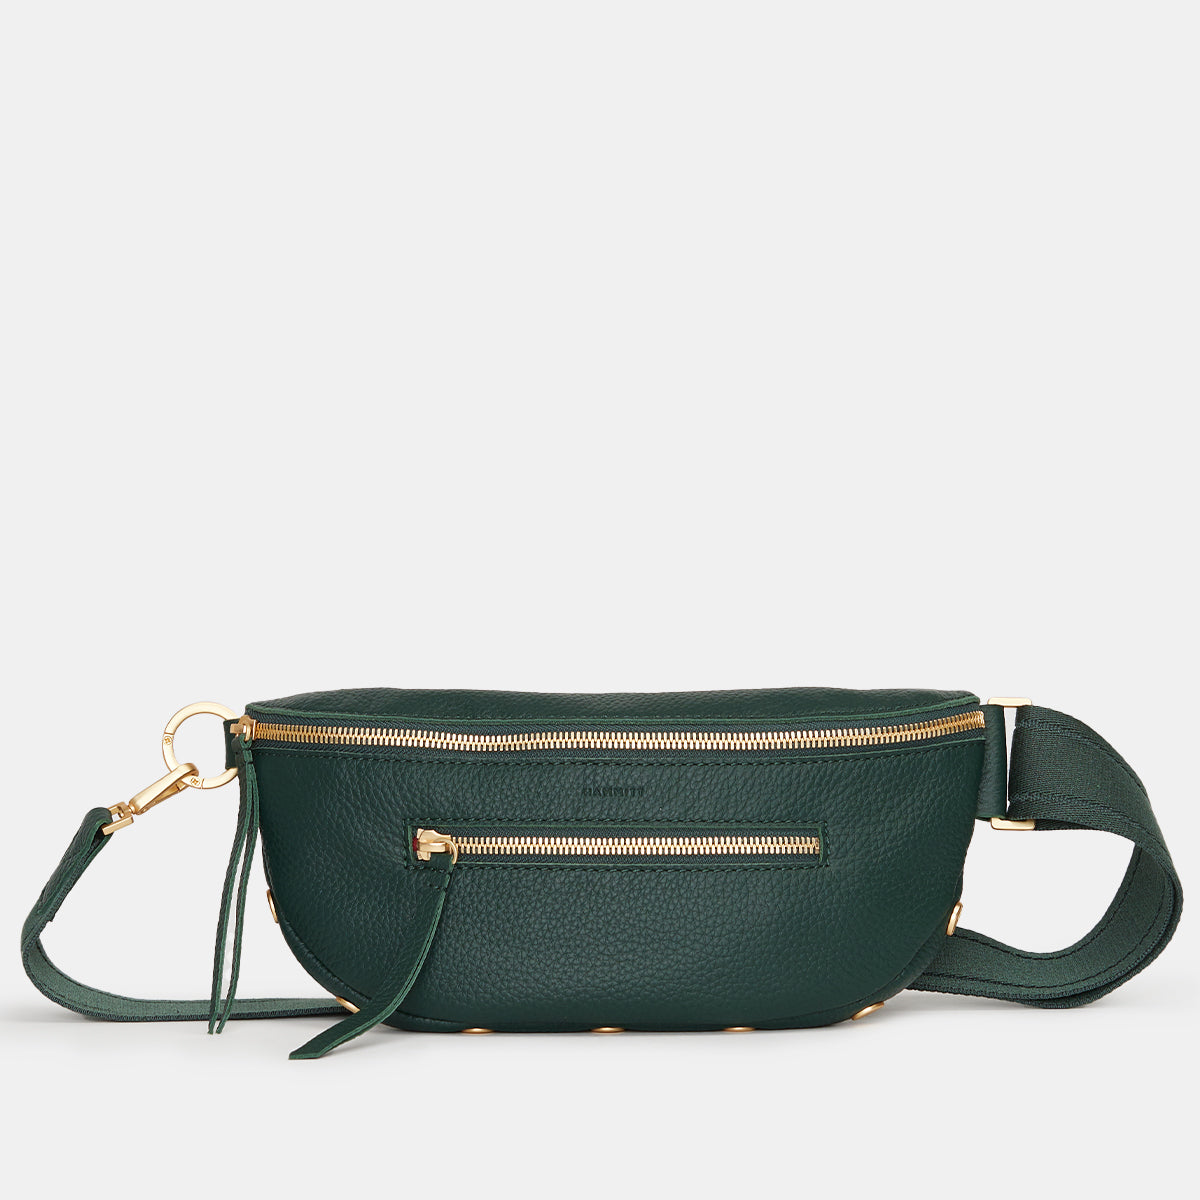 Charles-Crossbody-Grove-Green-Front-View